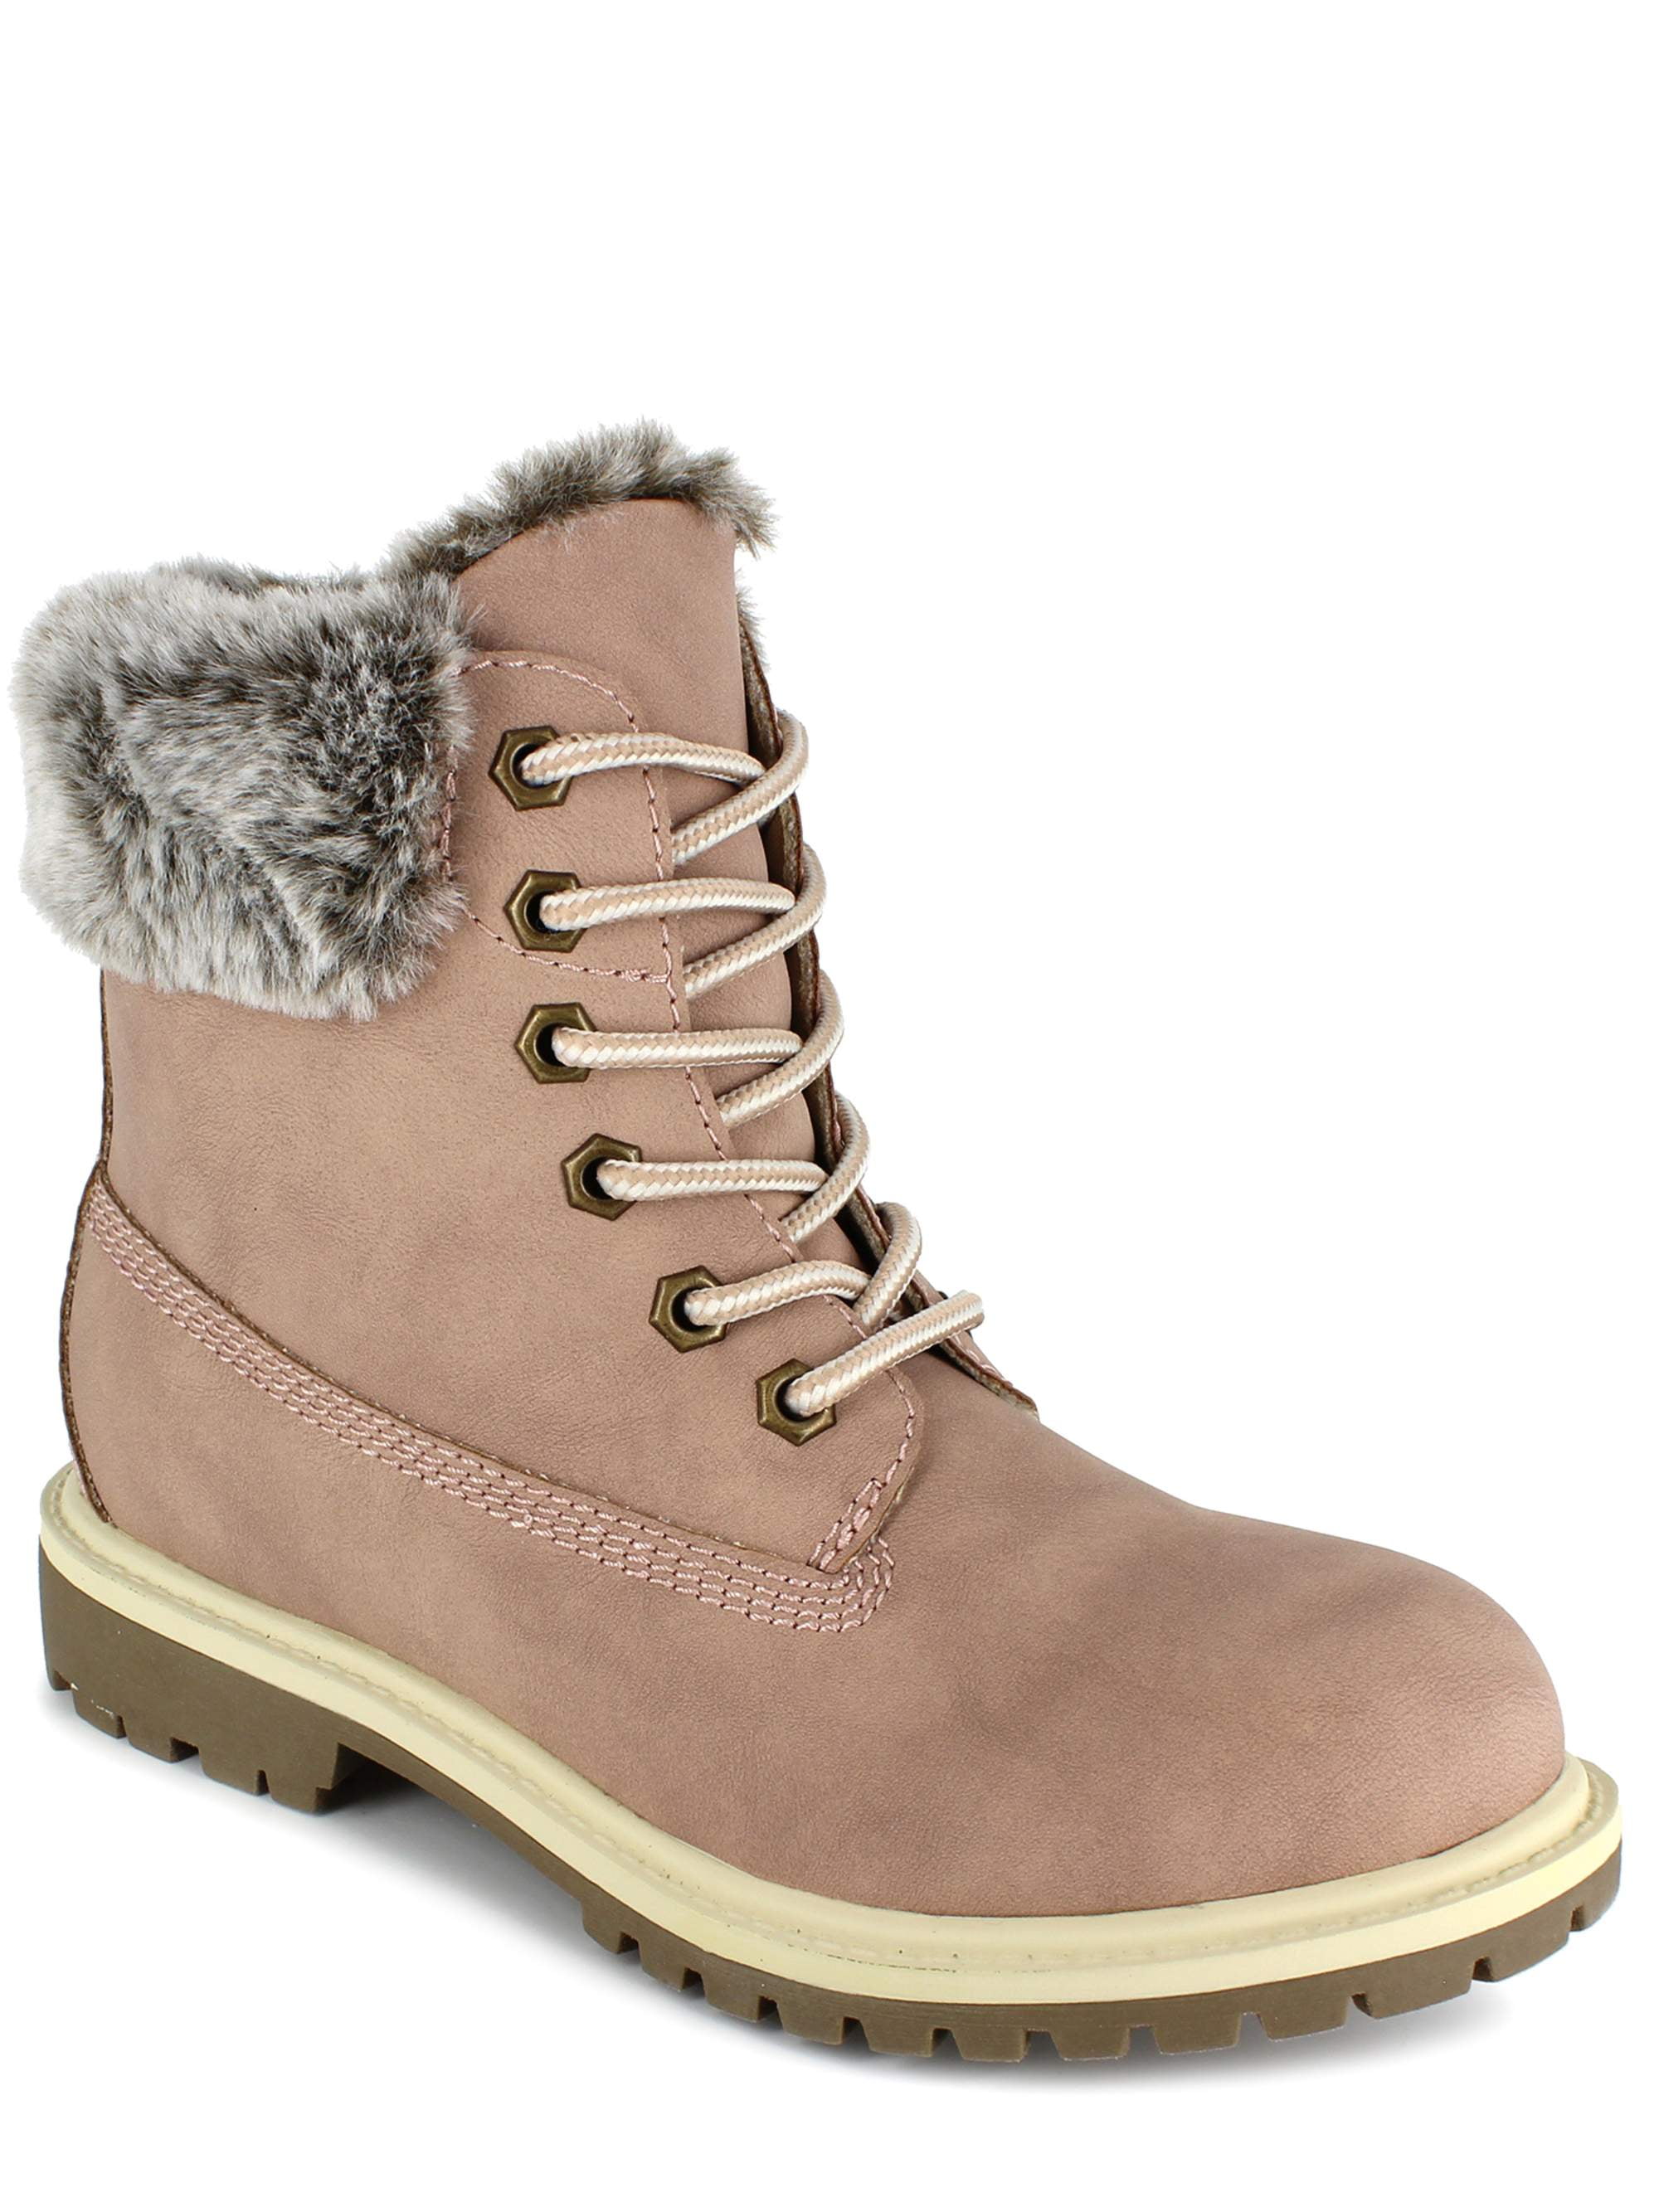 womens hiking boots with fur